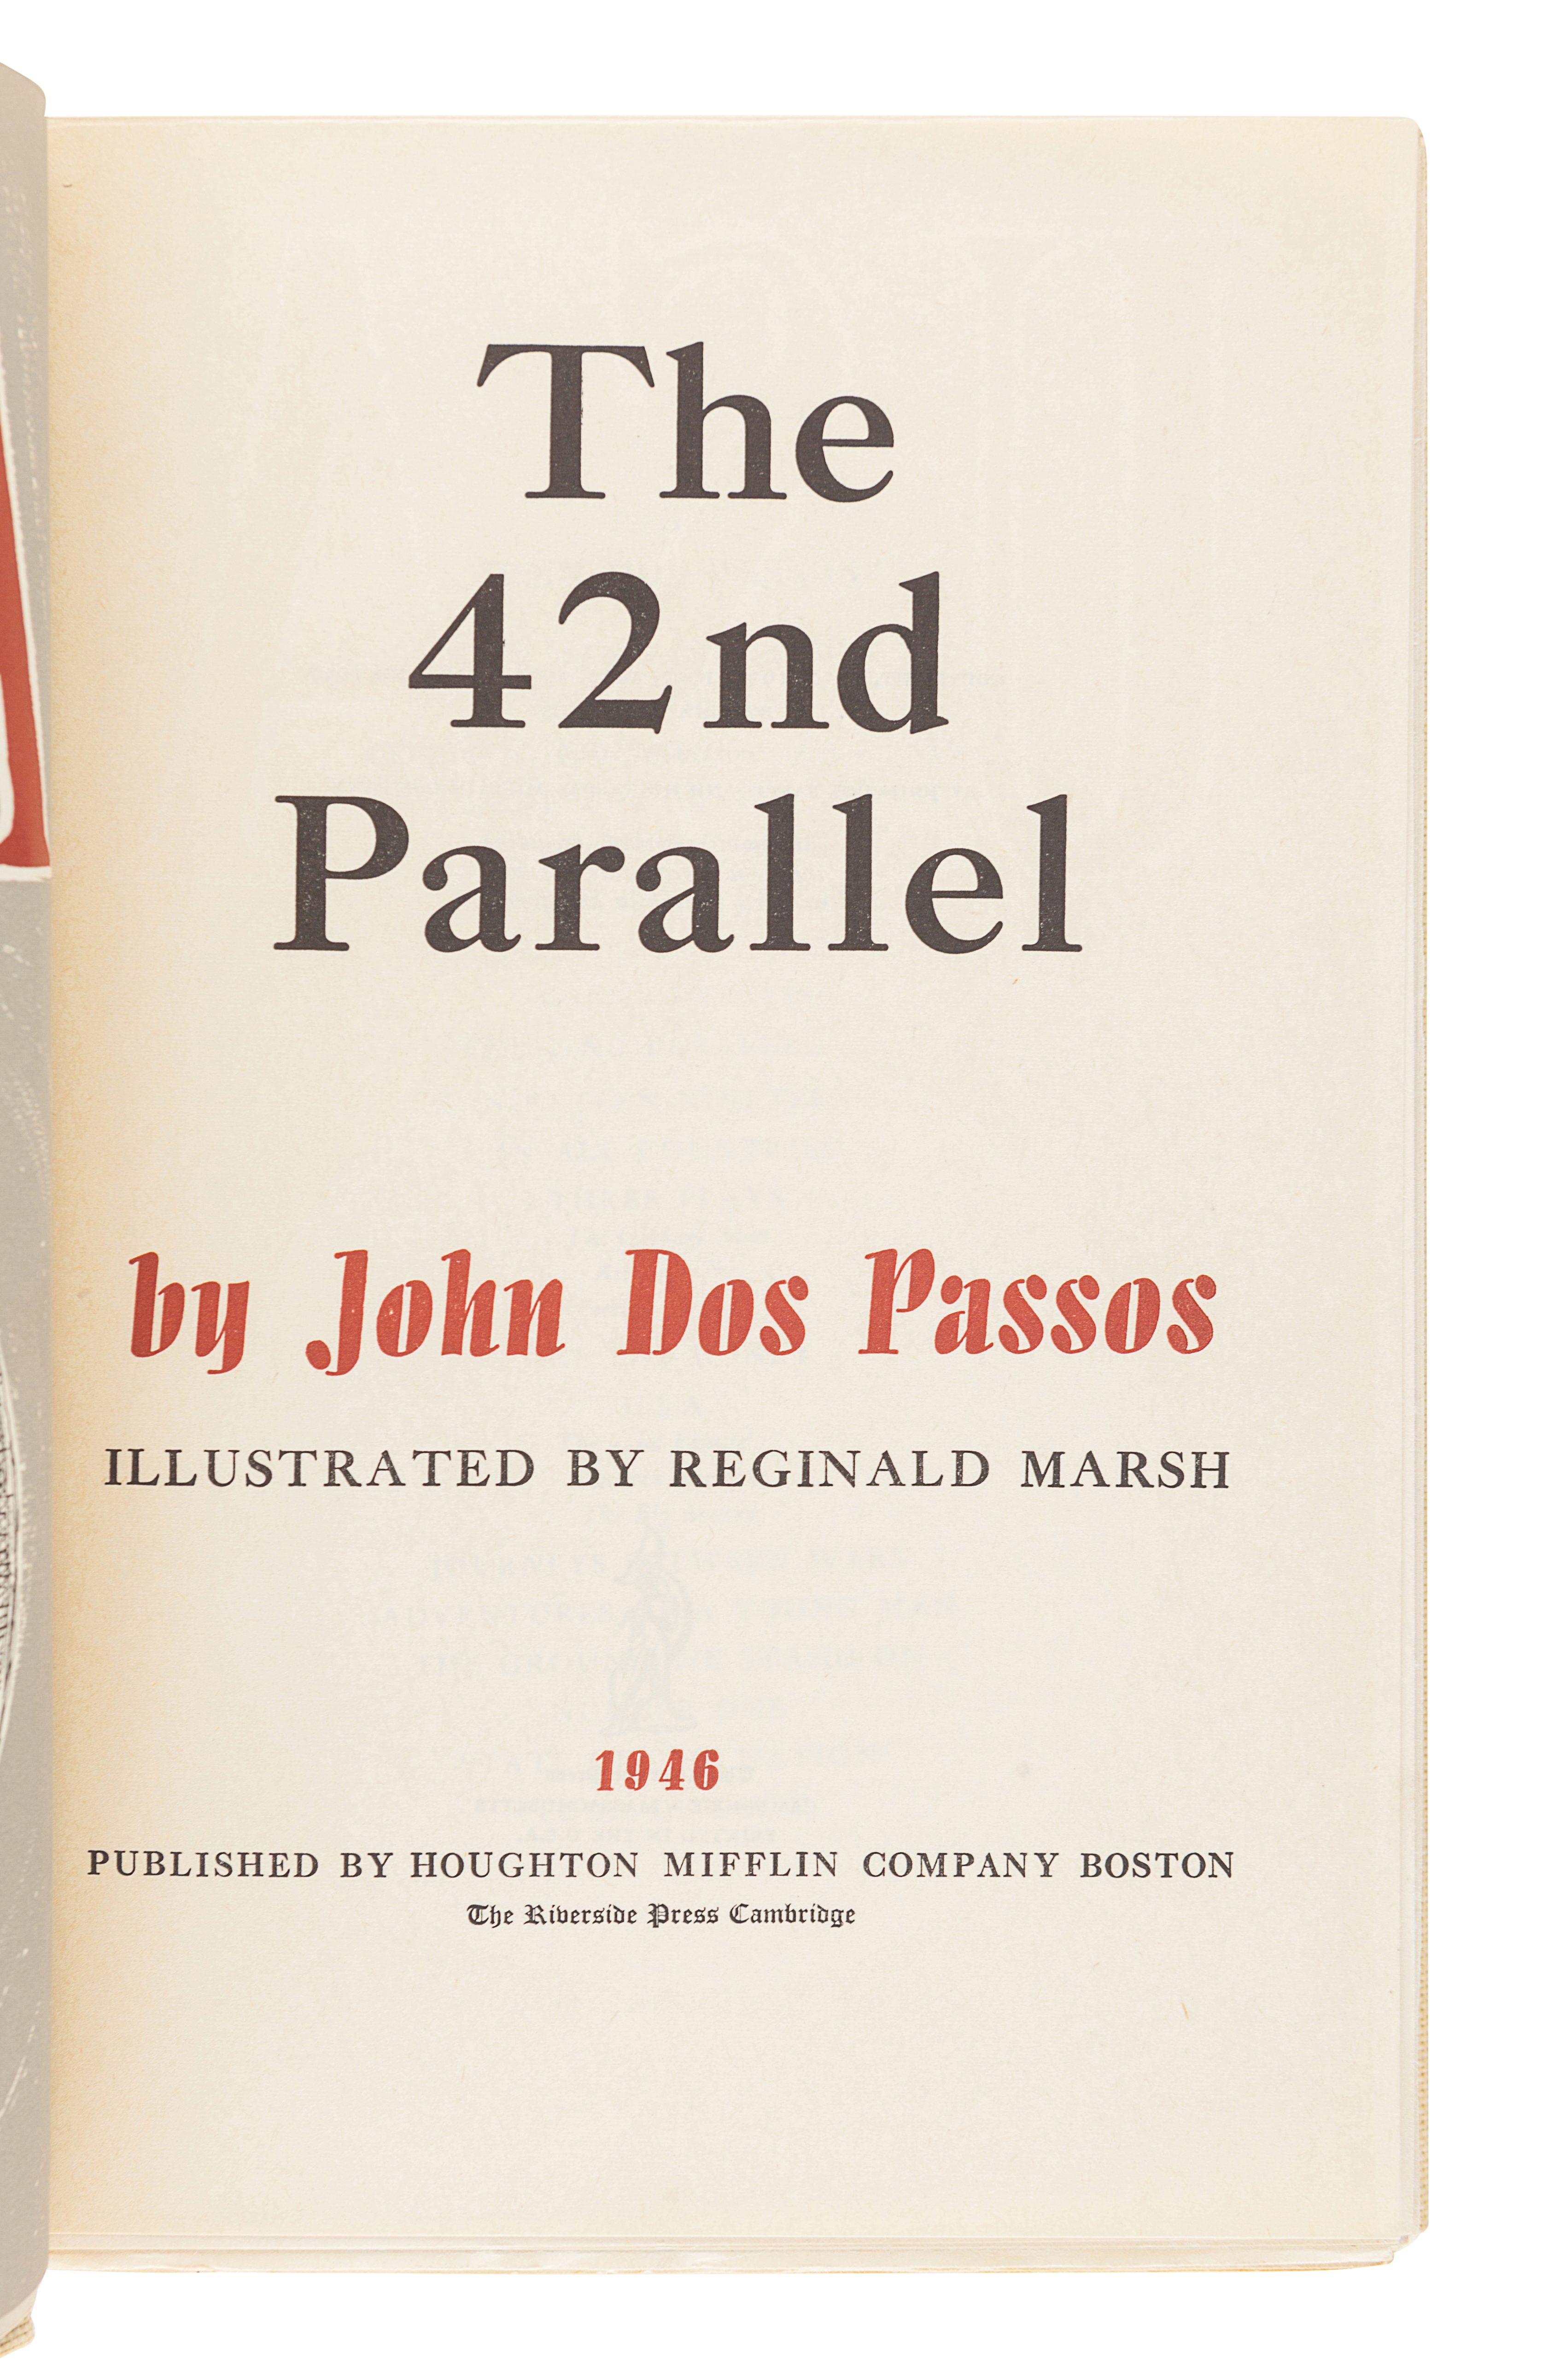 DOS PASSOS, John (1896-1970). [The U.S.A. Trilogy]. Comprising: The 42nd Parallel. -- 1919. -- The B - Image 2 of 3